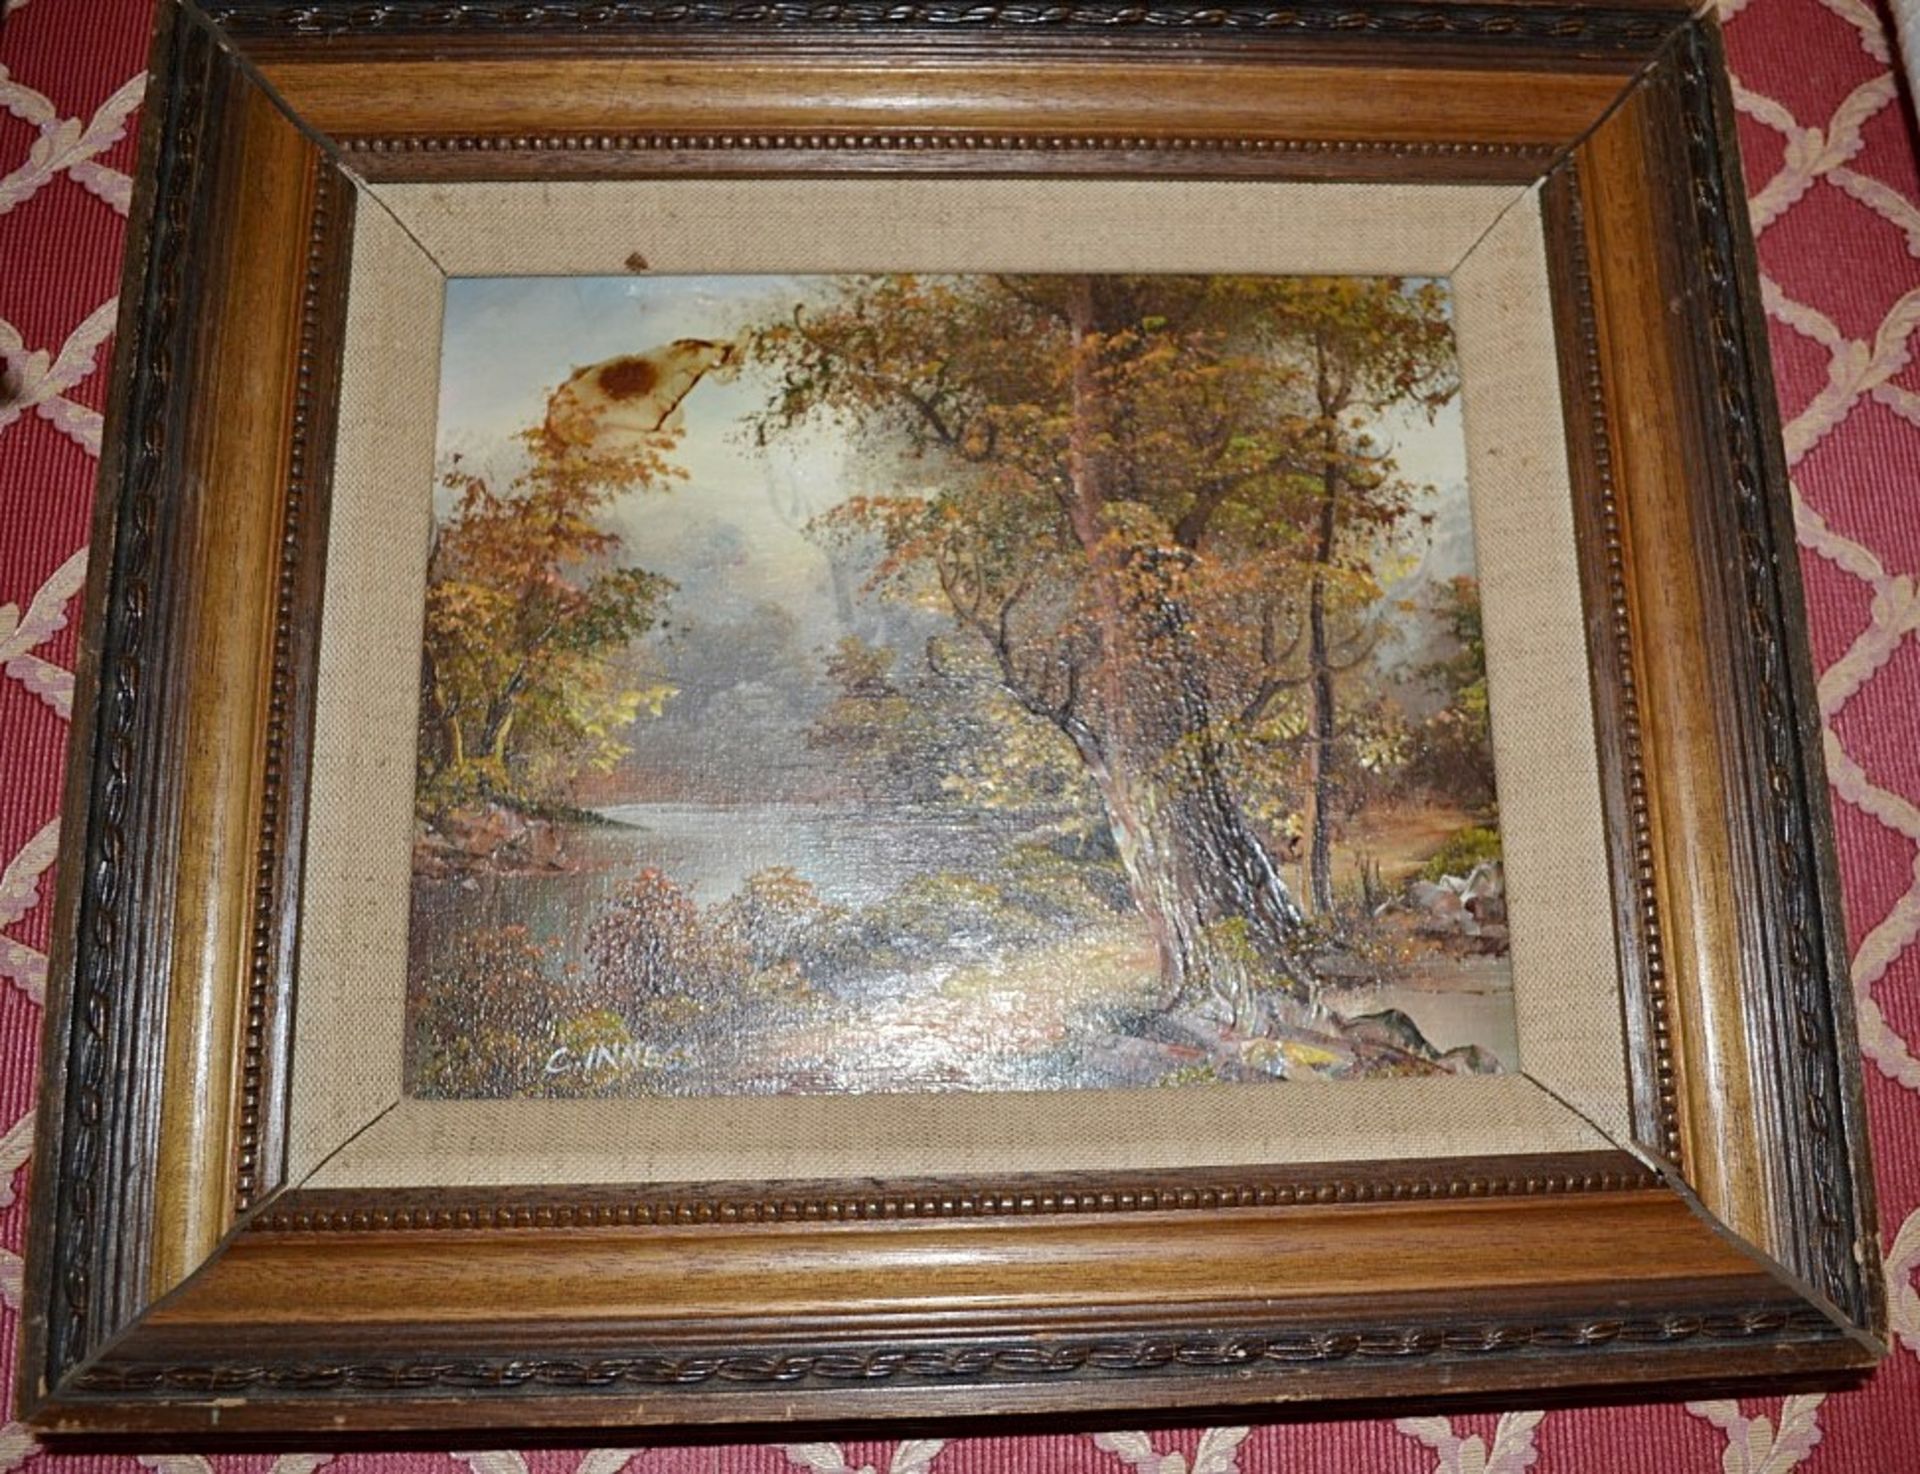 1 x Vintage Framed Oil Painting Of Woodland Scene With Lake - Signed C. Inness (Clara Inness) - - Image 2 of 4